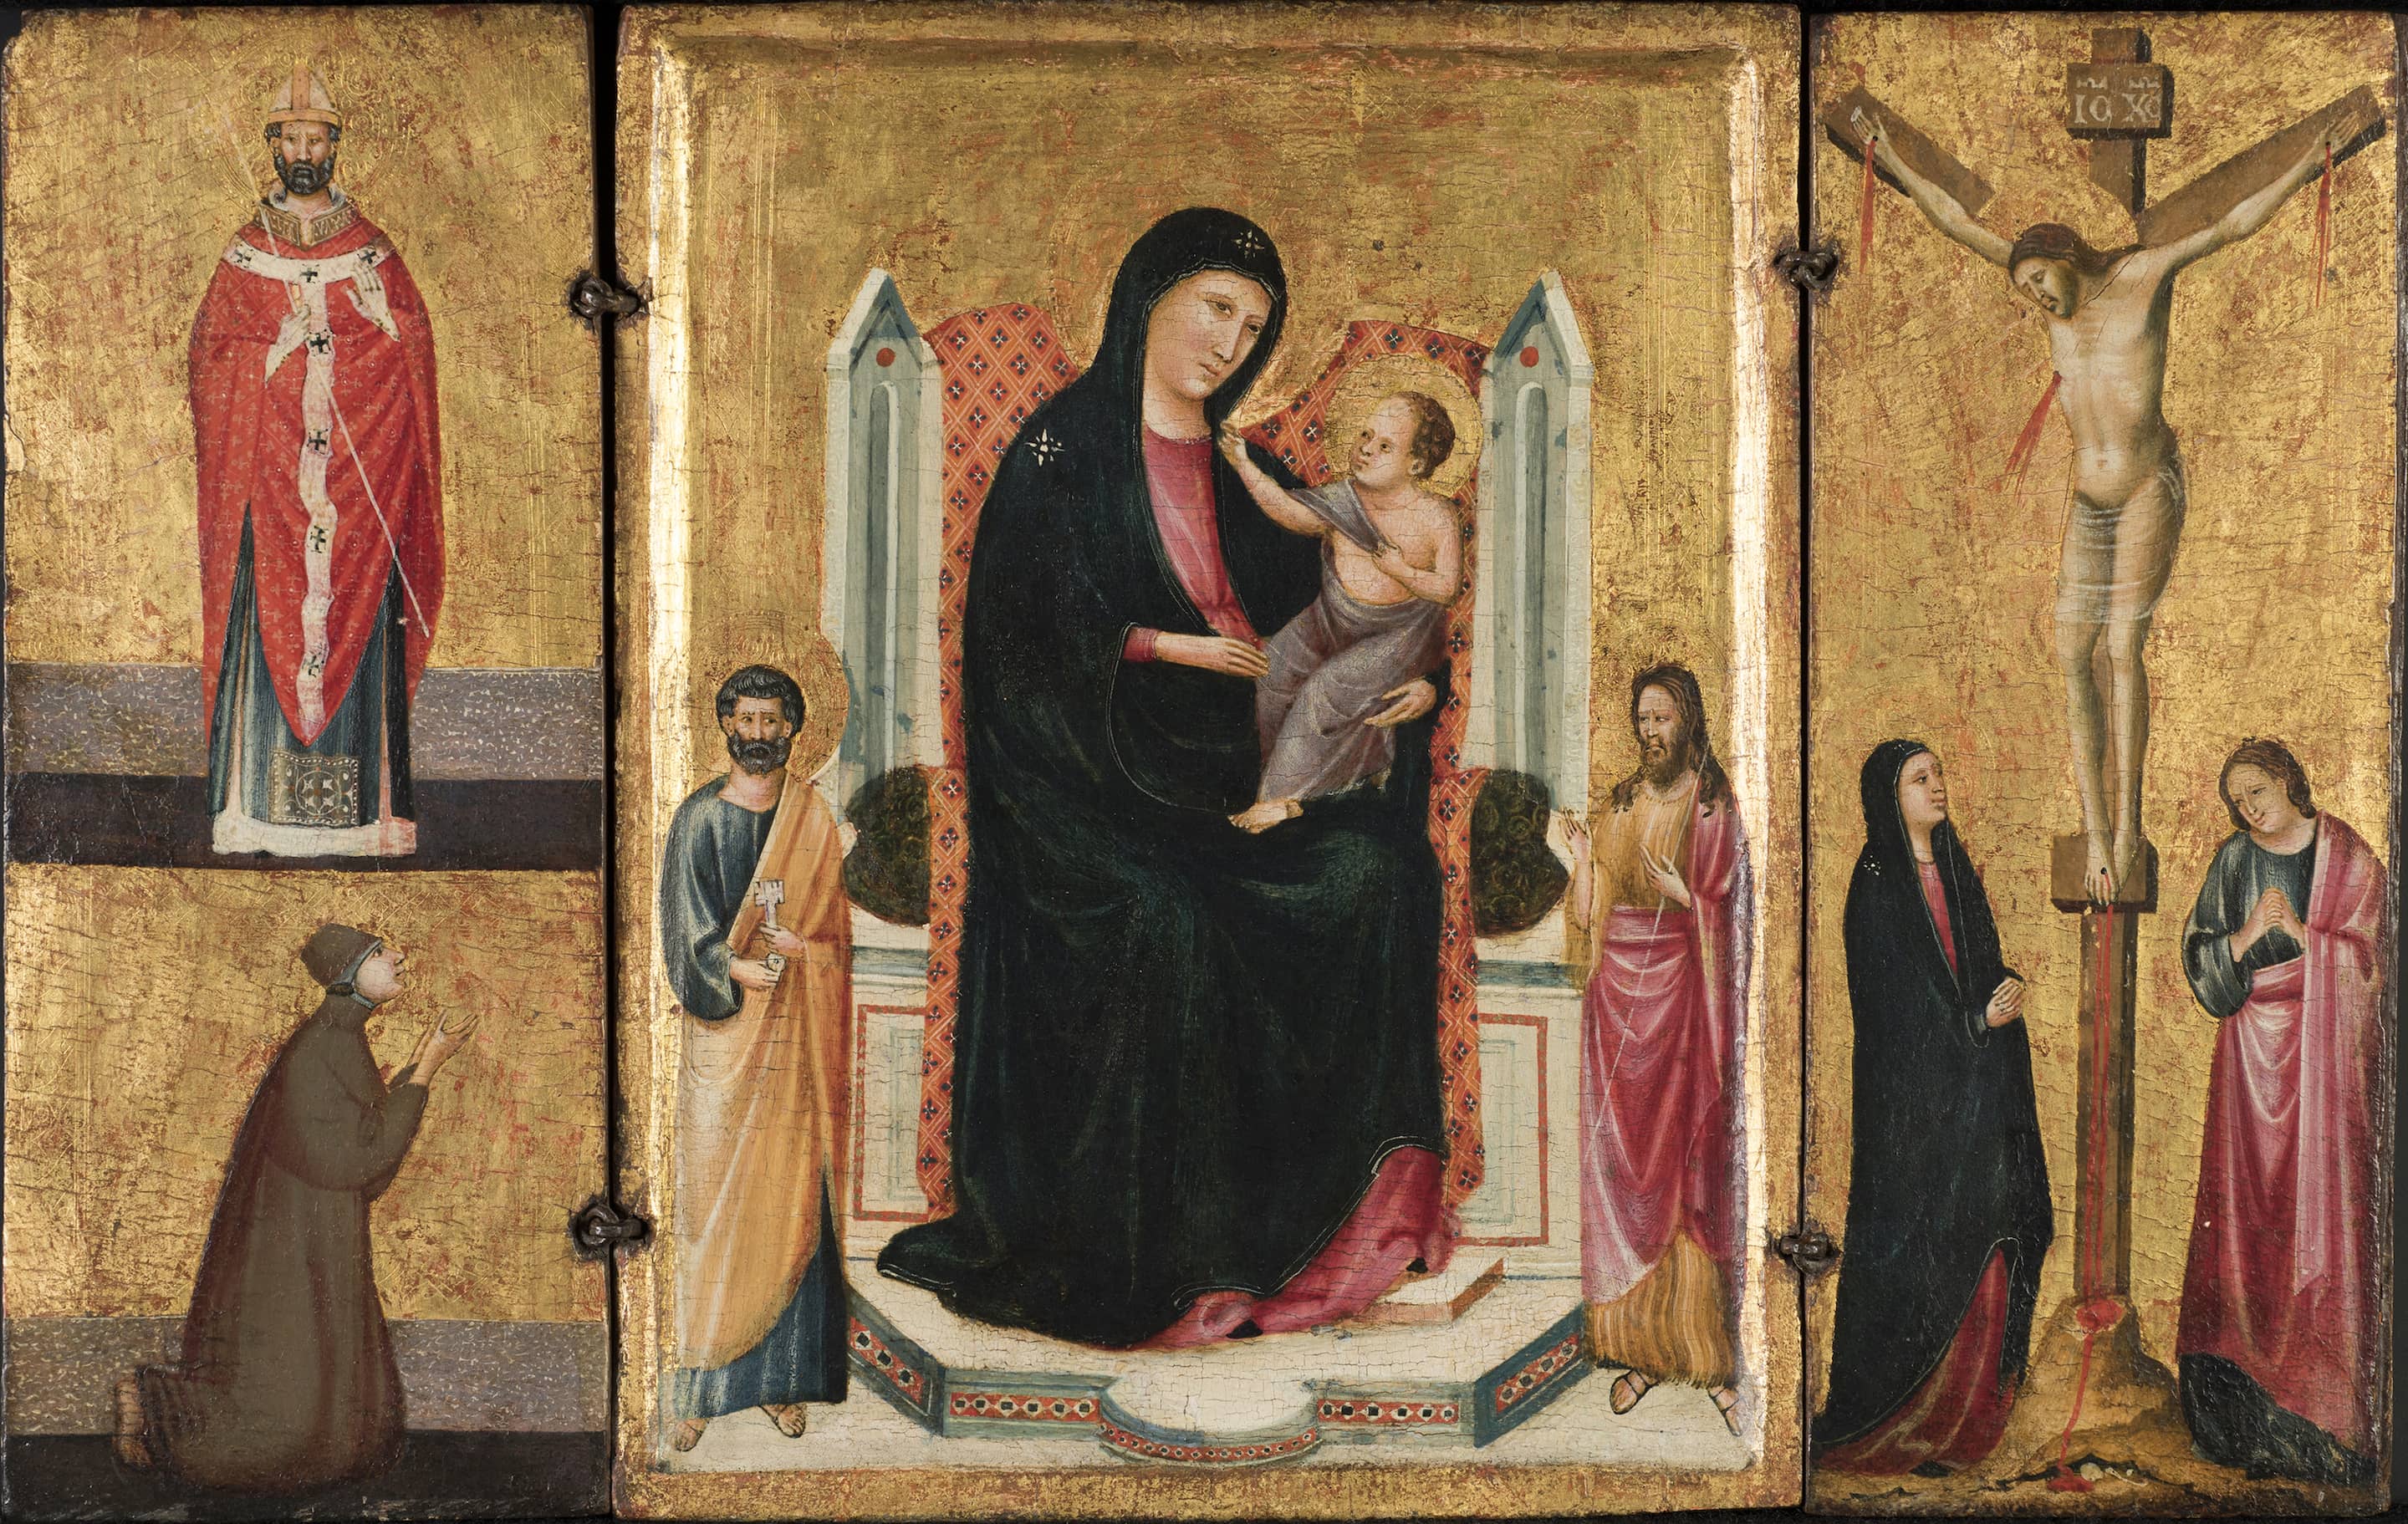 Triptych with images of two saints on the left panel, the Madonna and Child on the middle panel, and the Crucifixion on the right panel, and a gold leaf background.